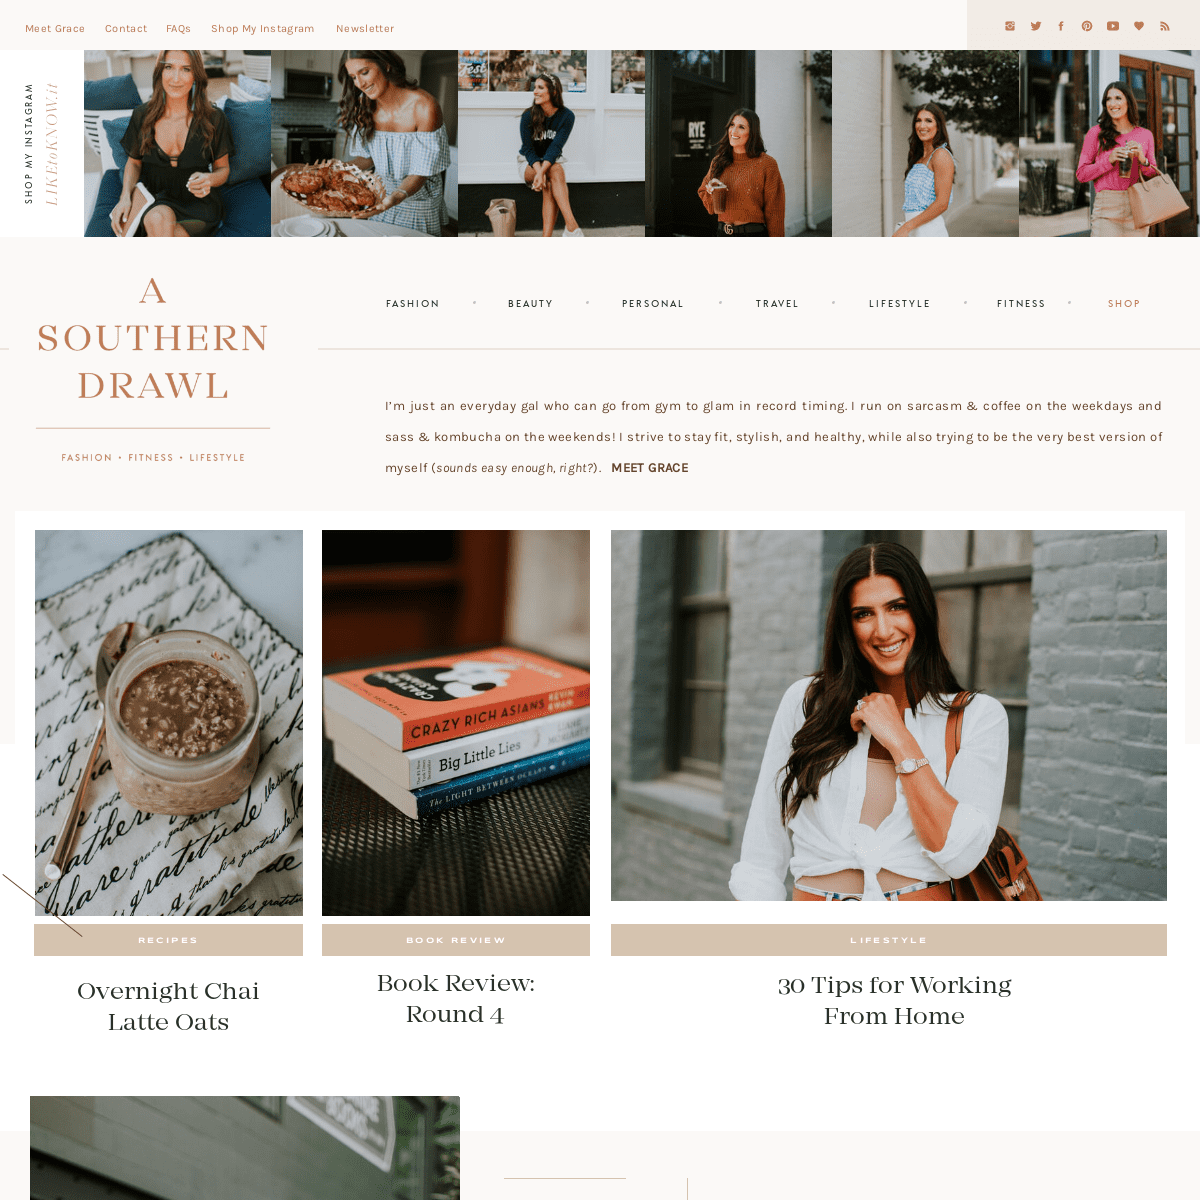 A Southern Drawl - Fashion, Fitness, and Travel Blog